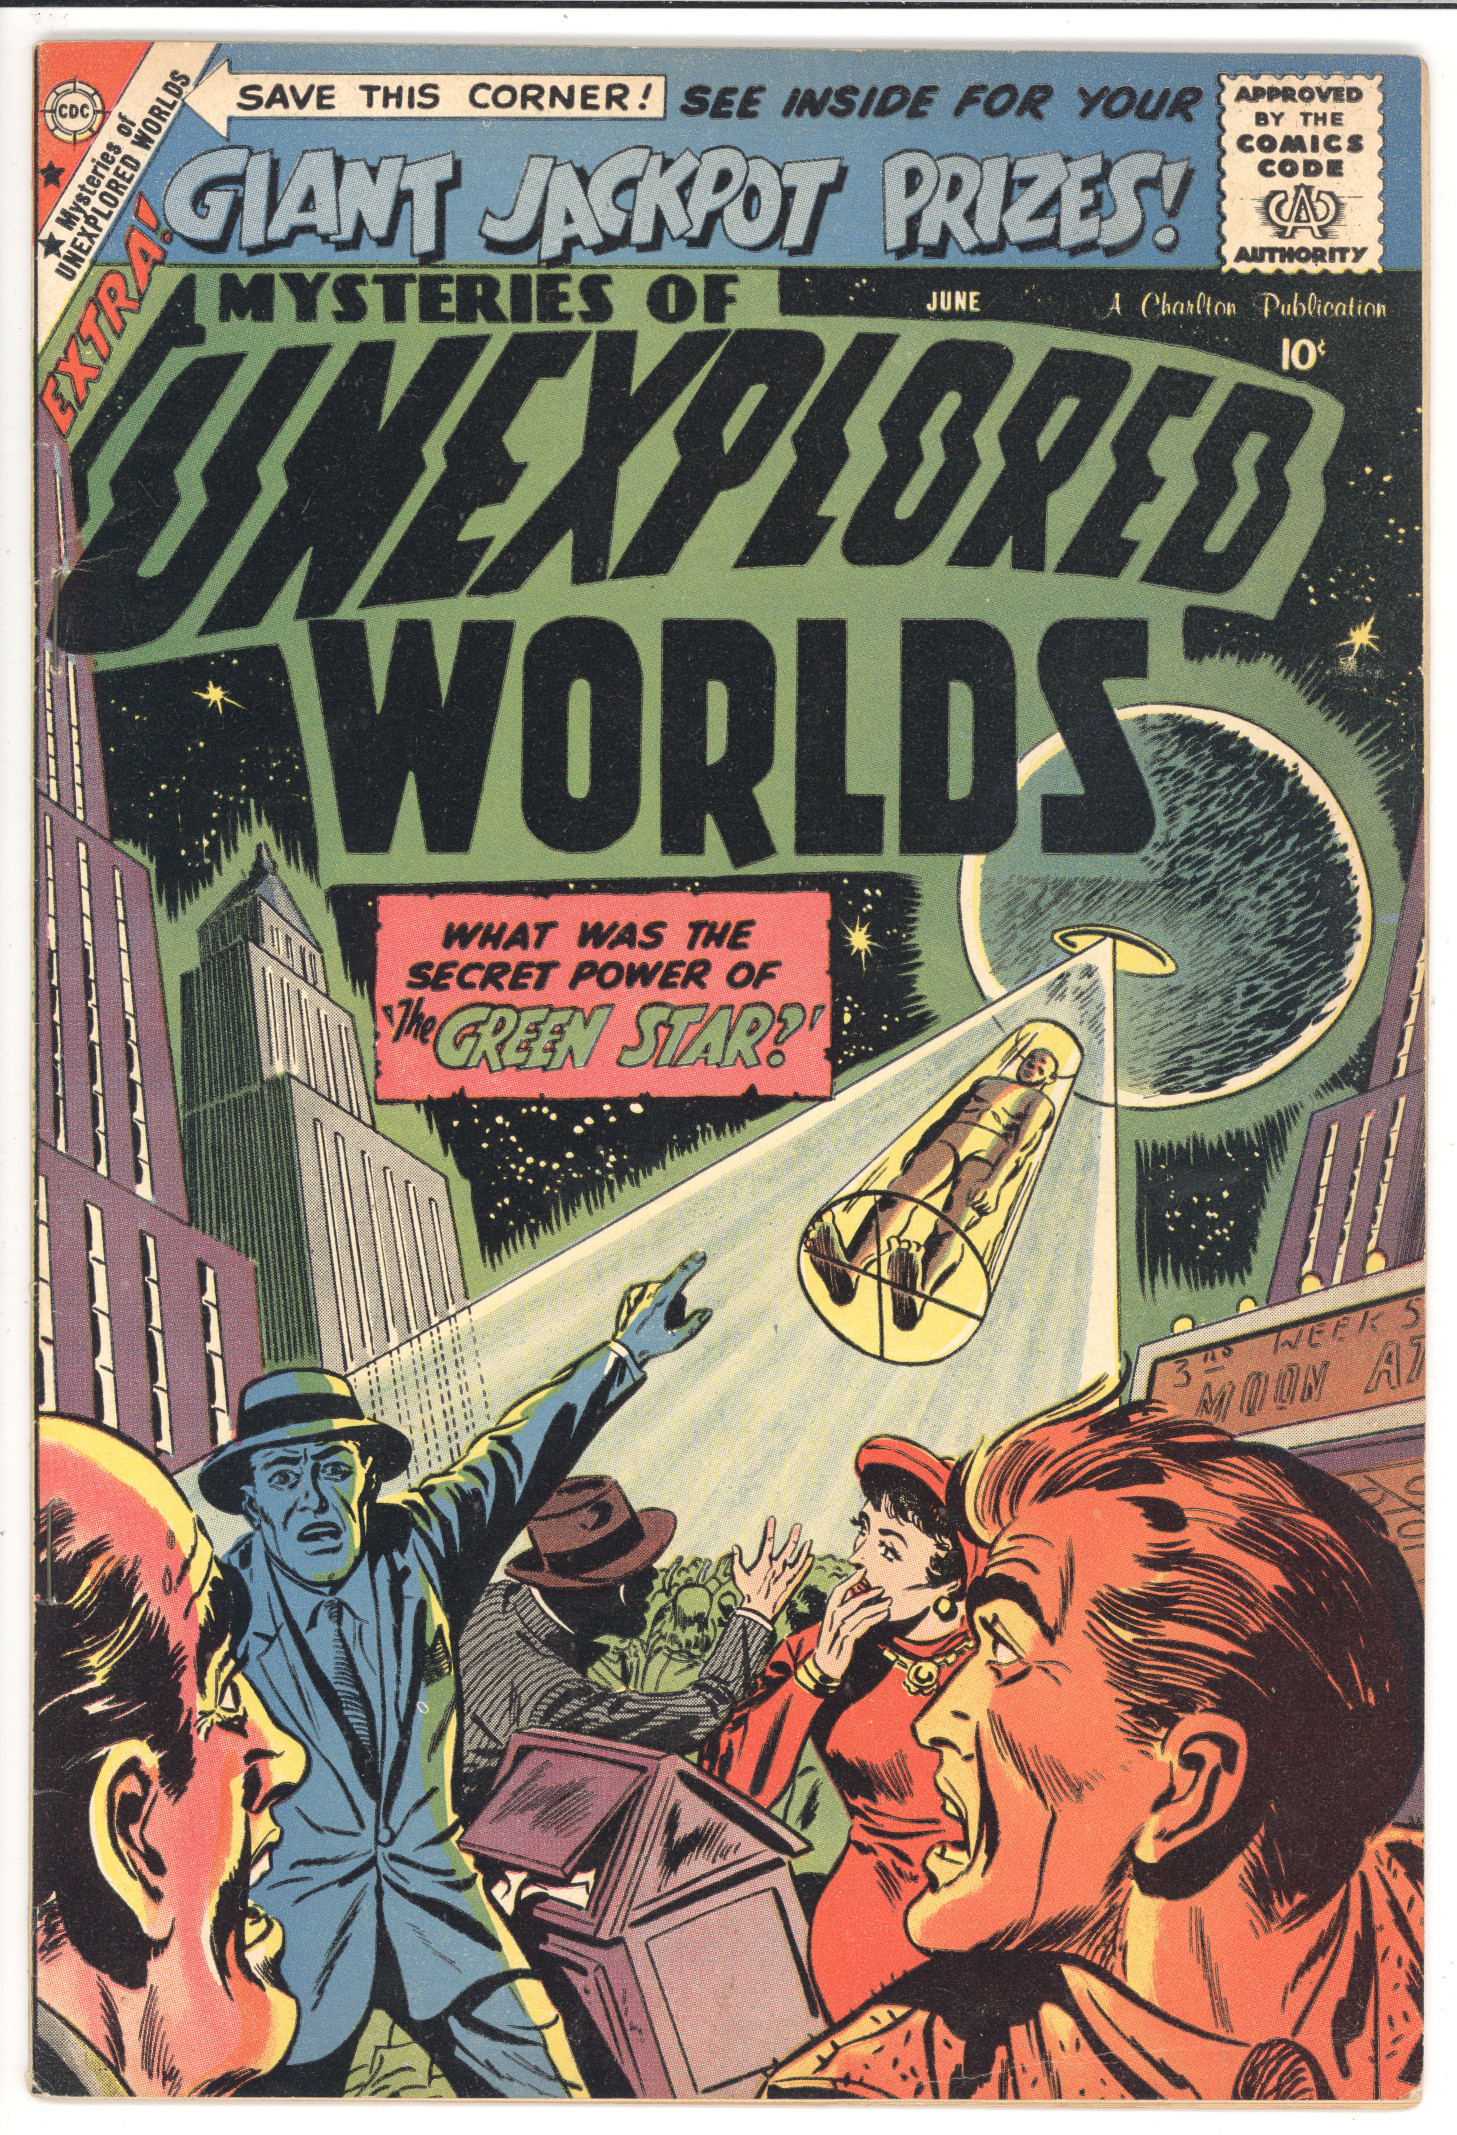 Mysteries of Unexplored Worlds  #13